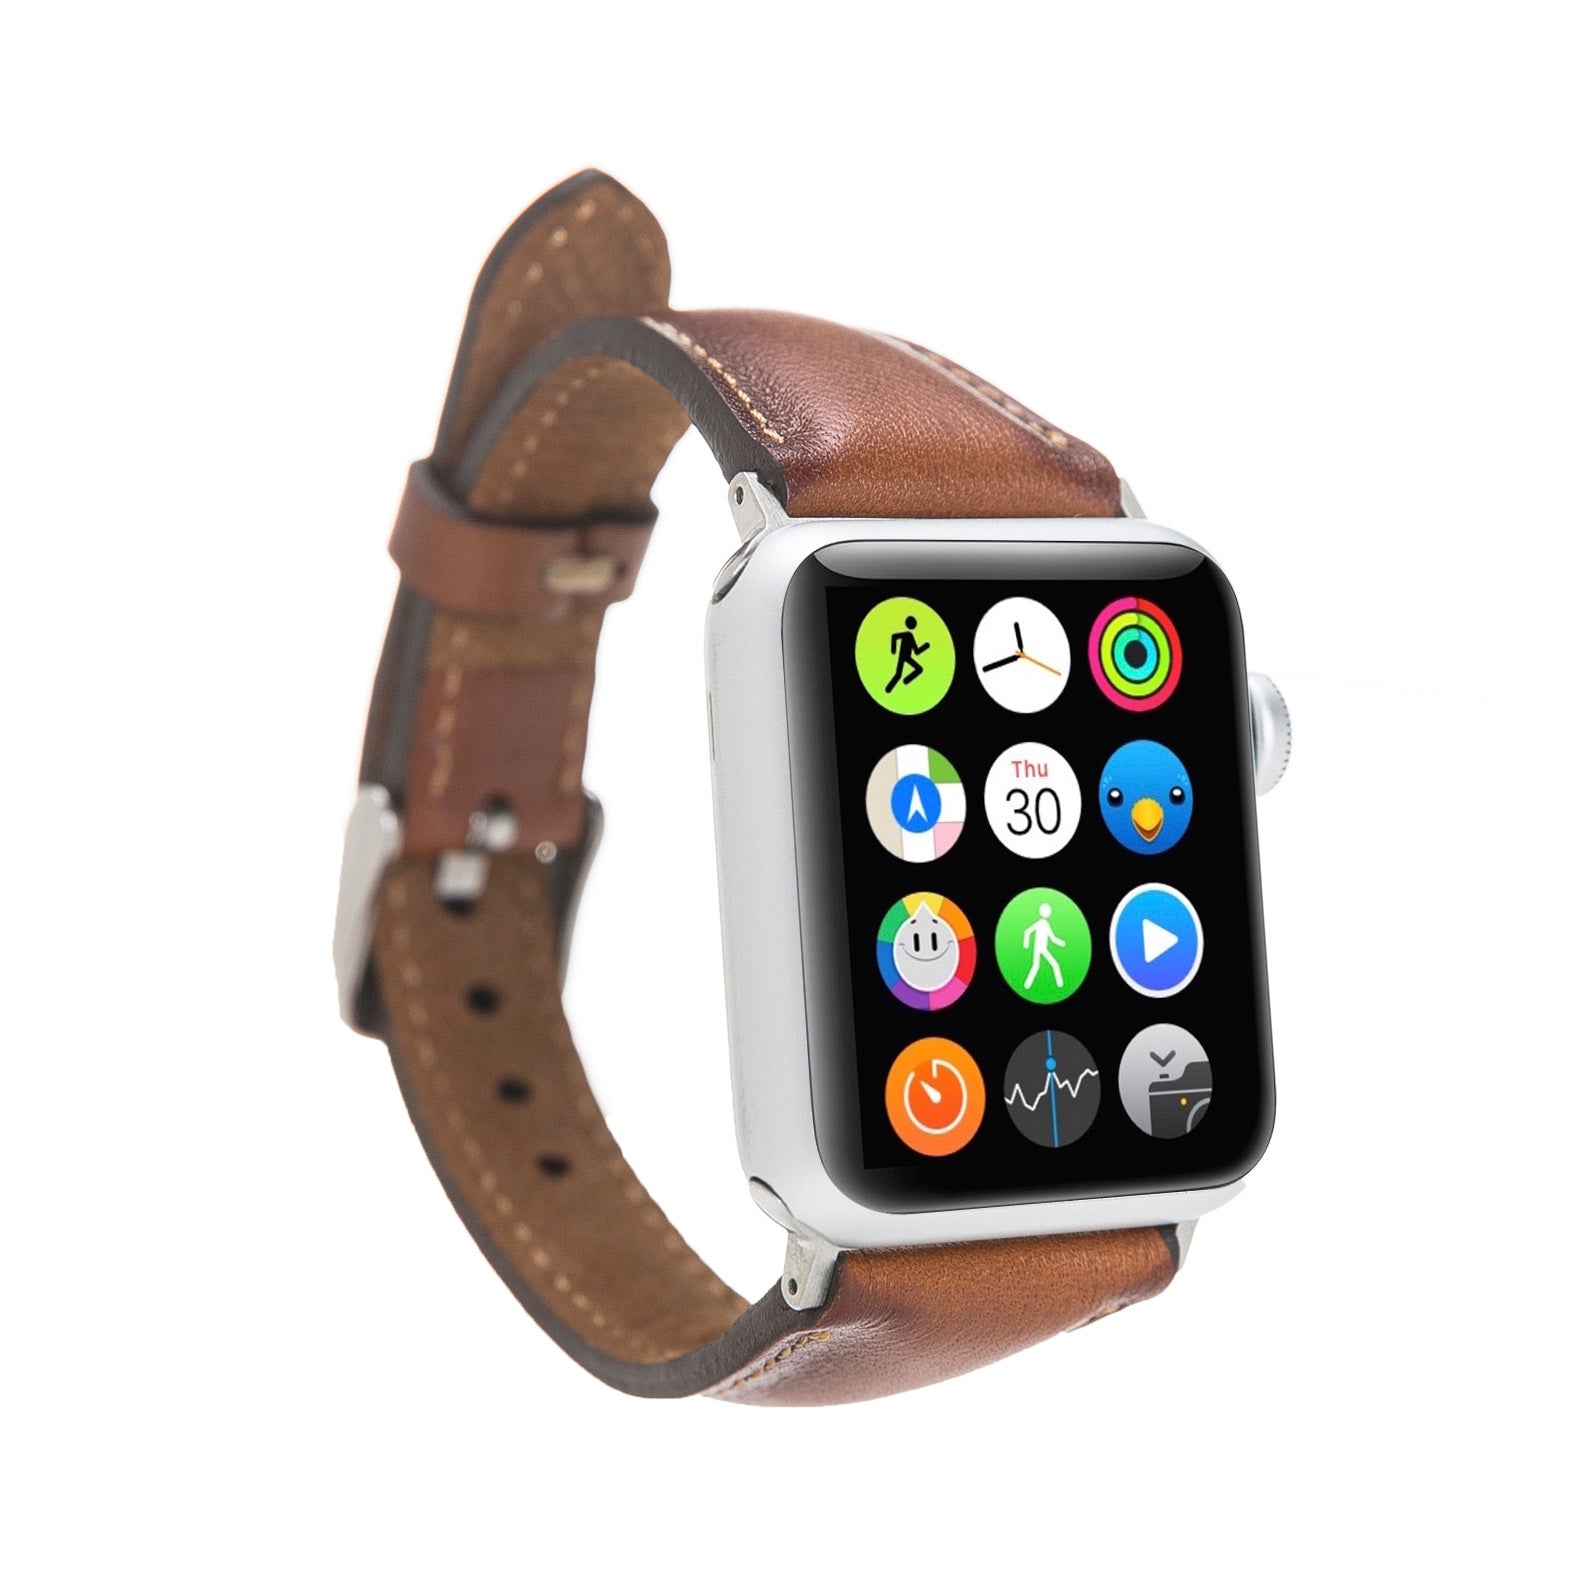 Slim Strap - Full Grain Leather Band for Apple Watch 38mm / 40mm - EFFECT BROWN - saracleather